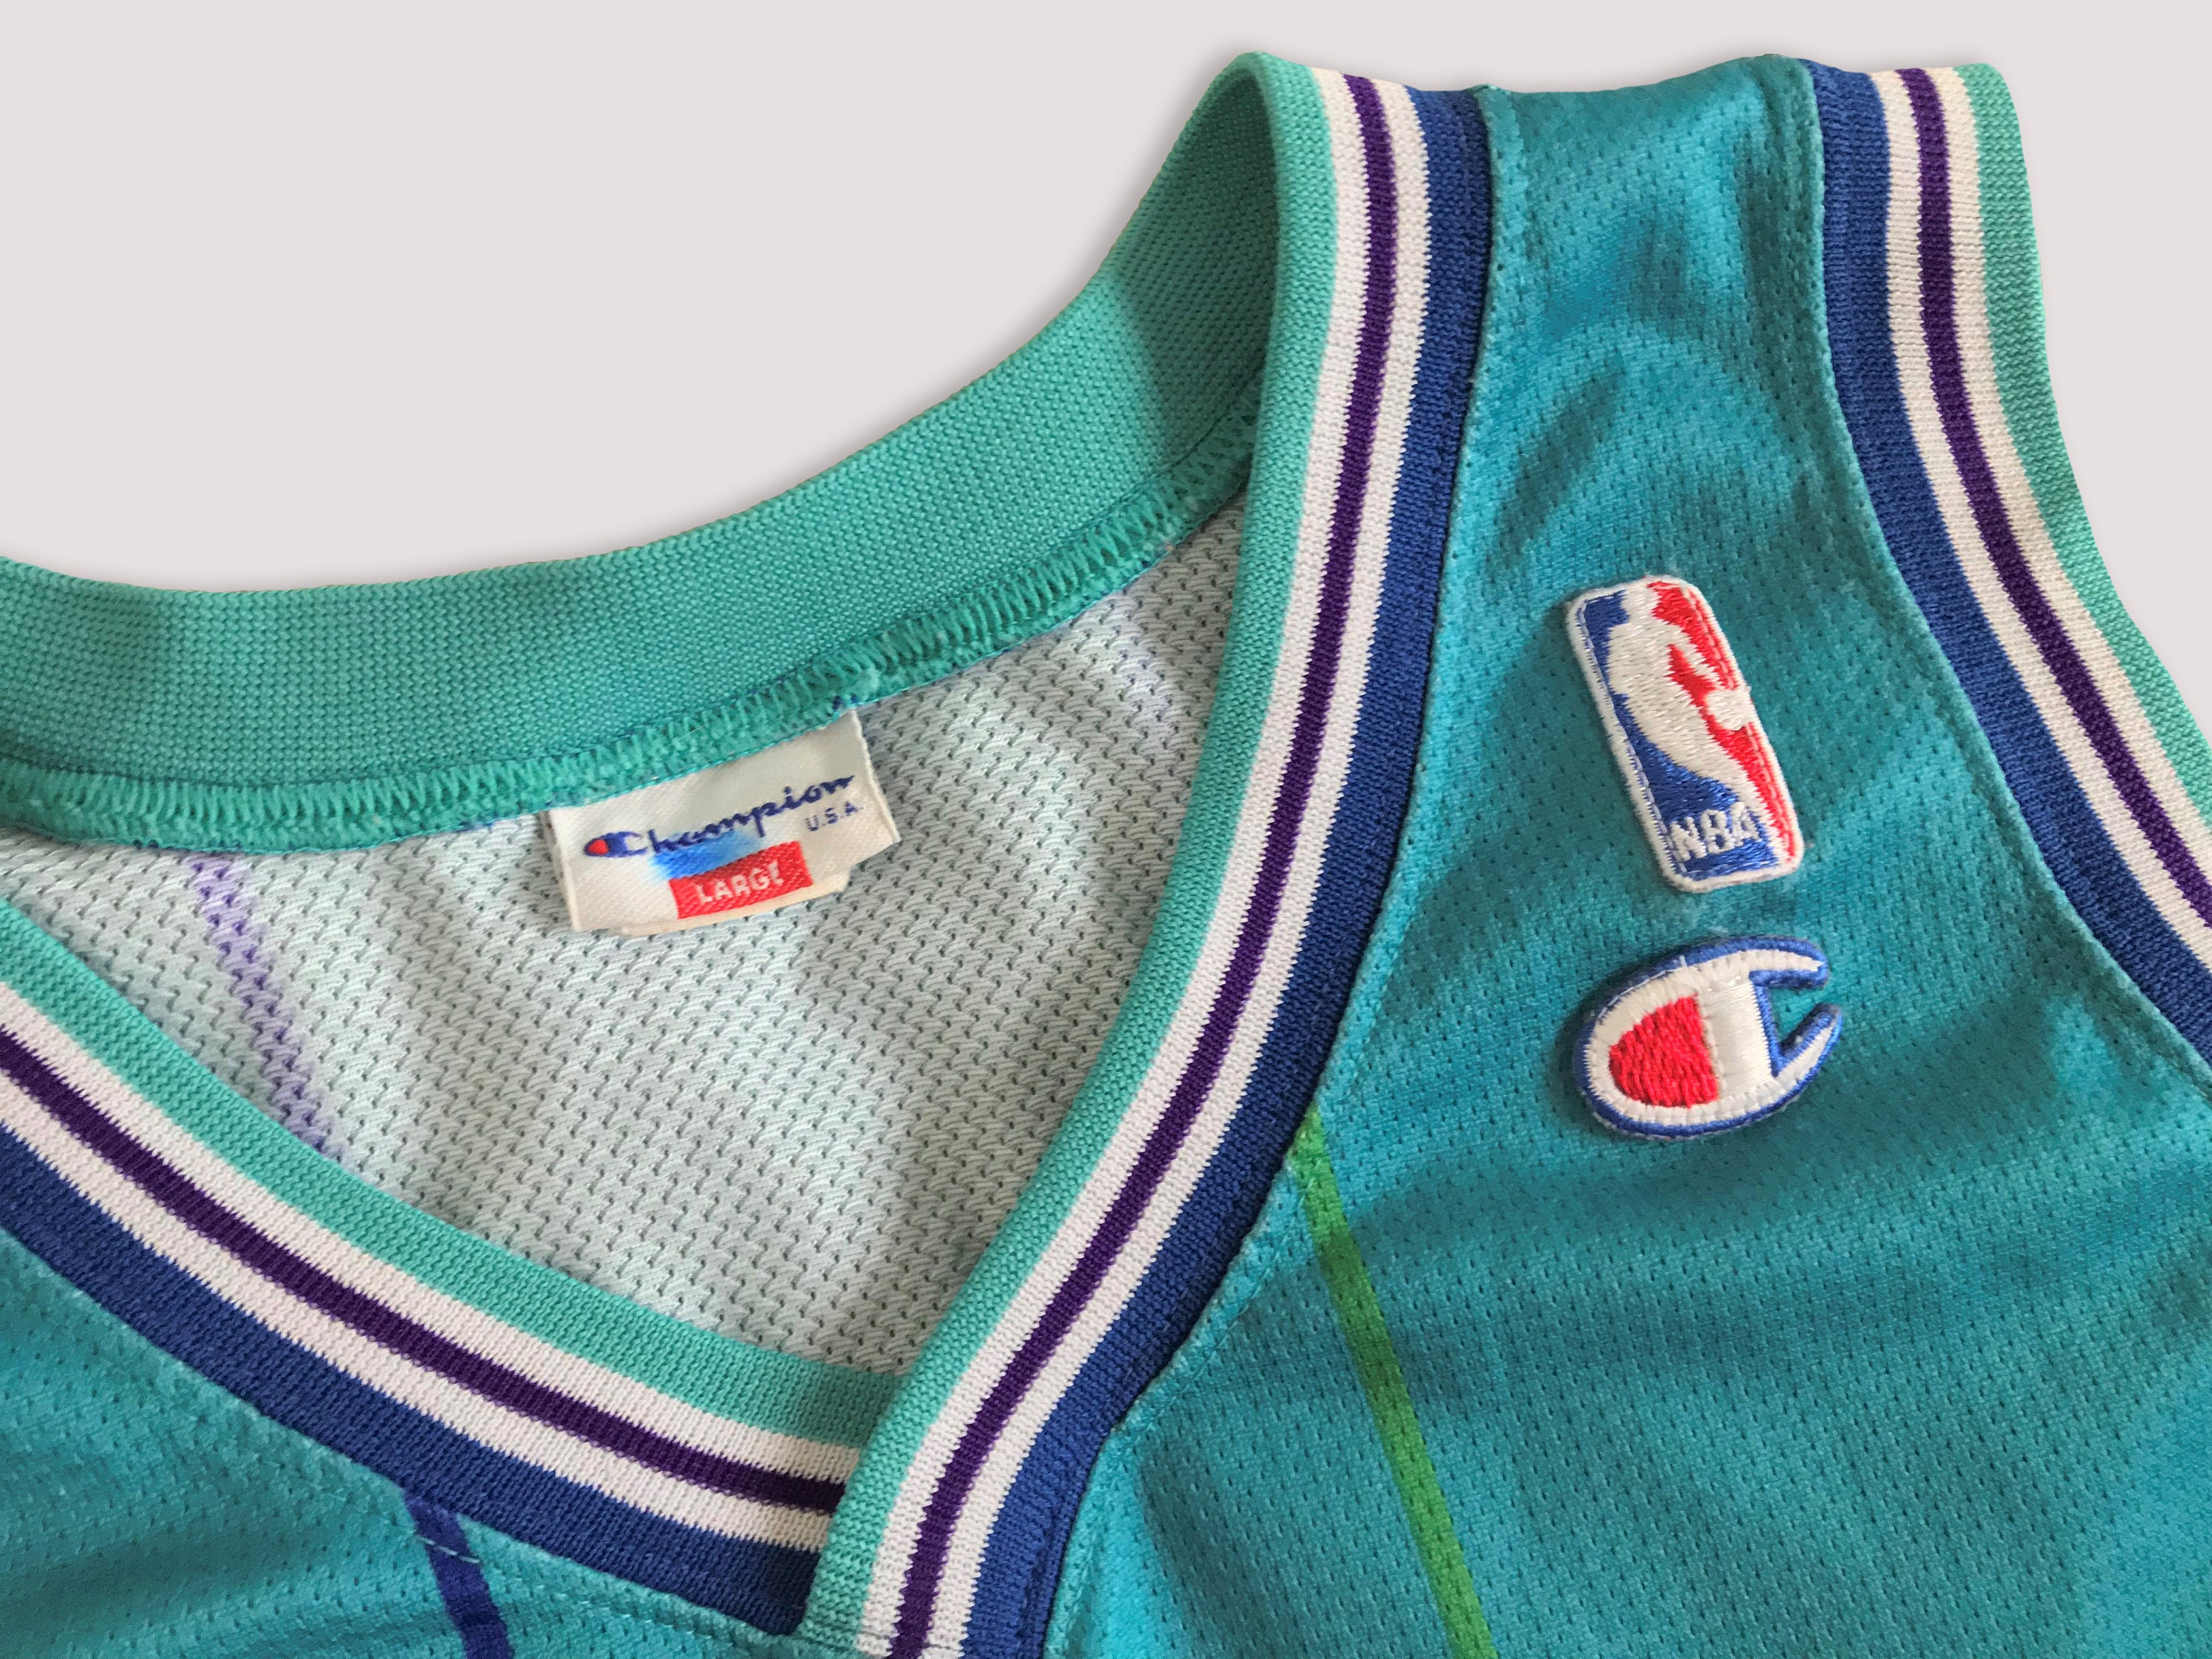 90s Charlotte Hornets Champion Muggsy Bogues Jersey - 5 Star Vintage